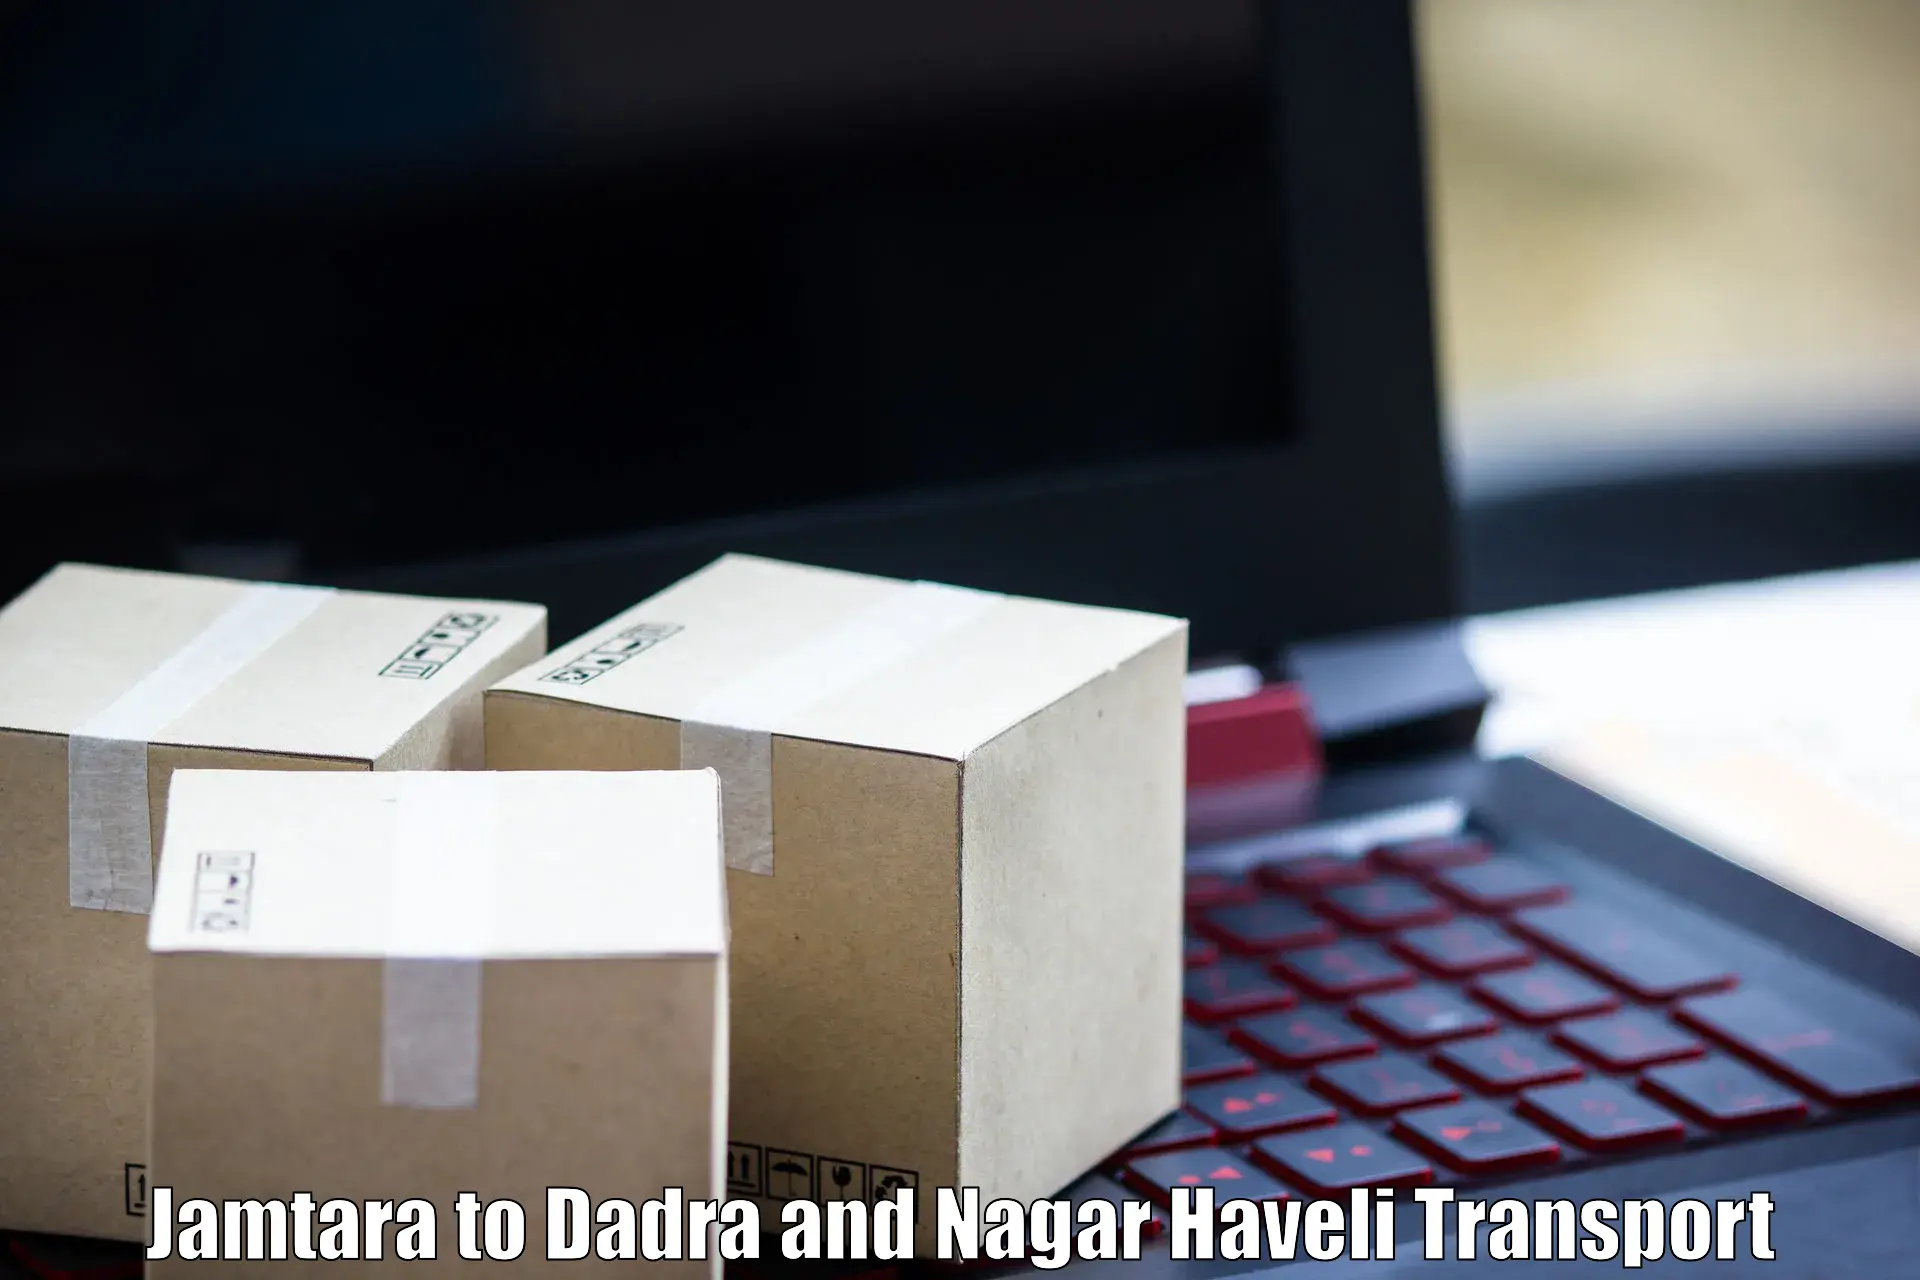 Package delivery services Jamtara to Dadra and Nagar Haveli